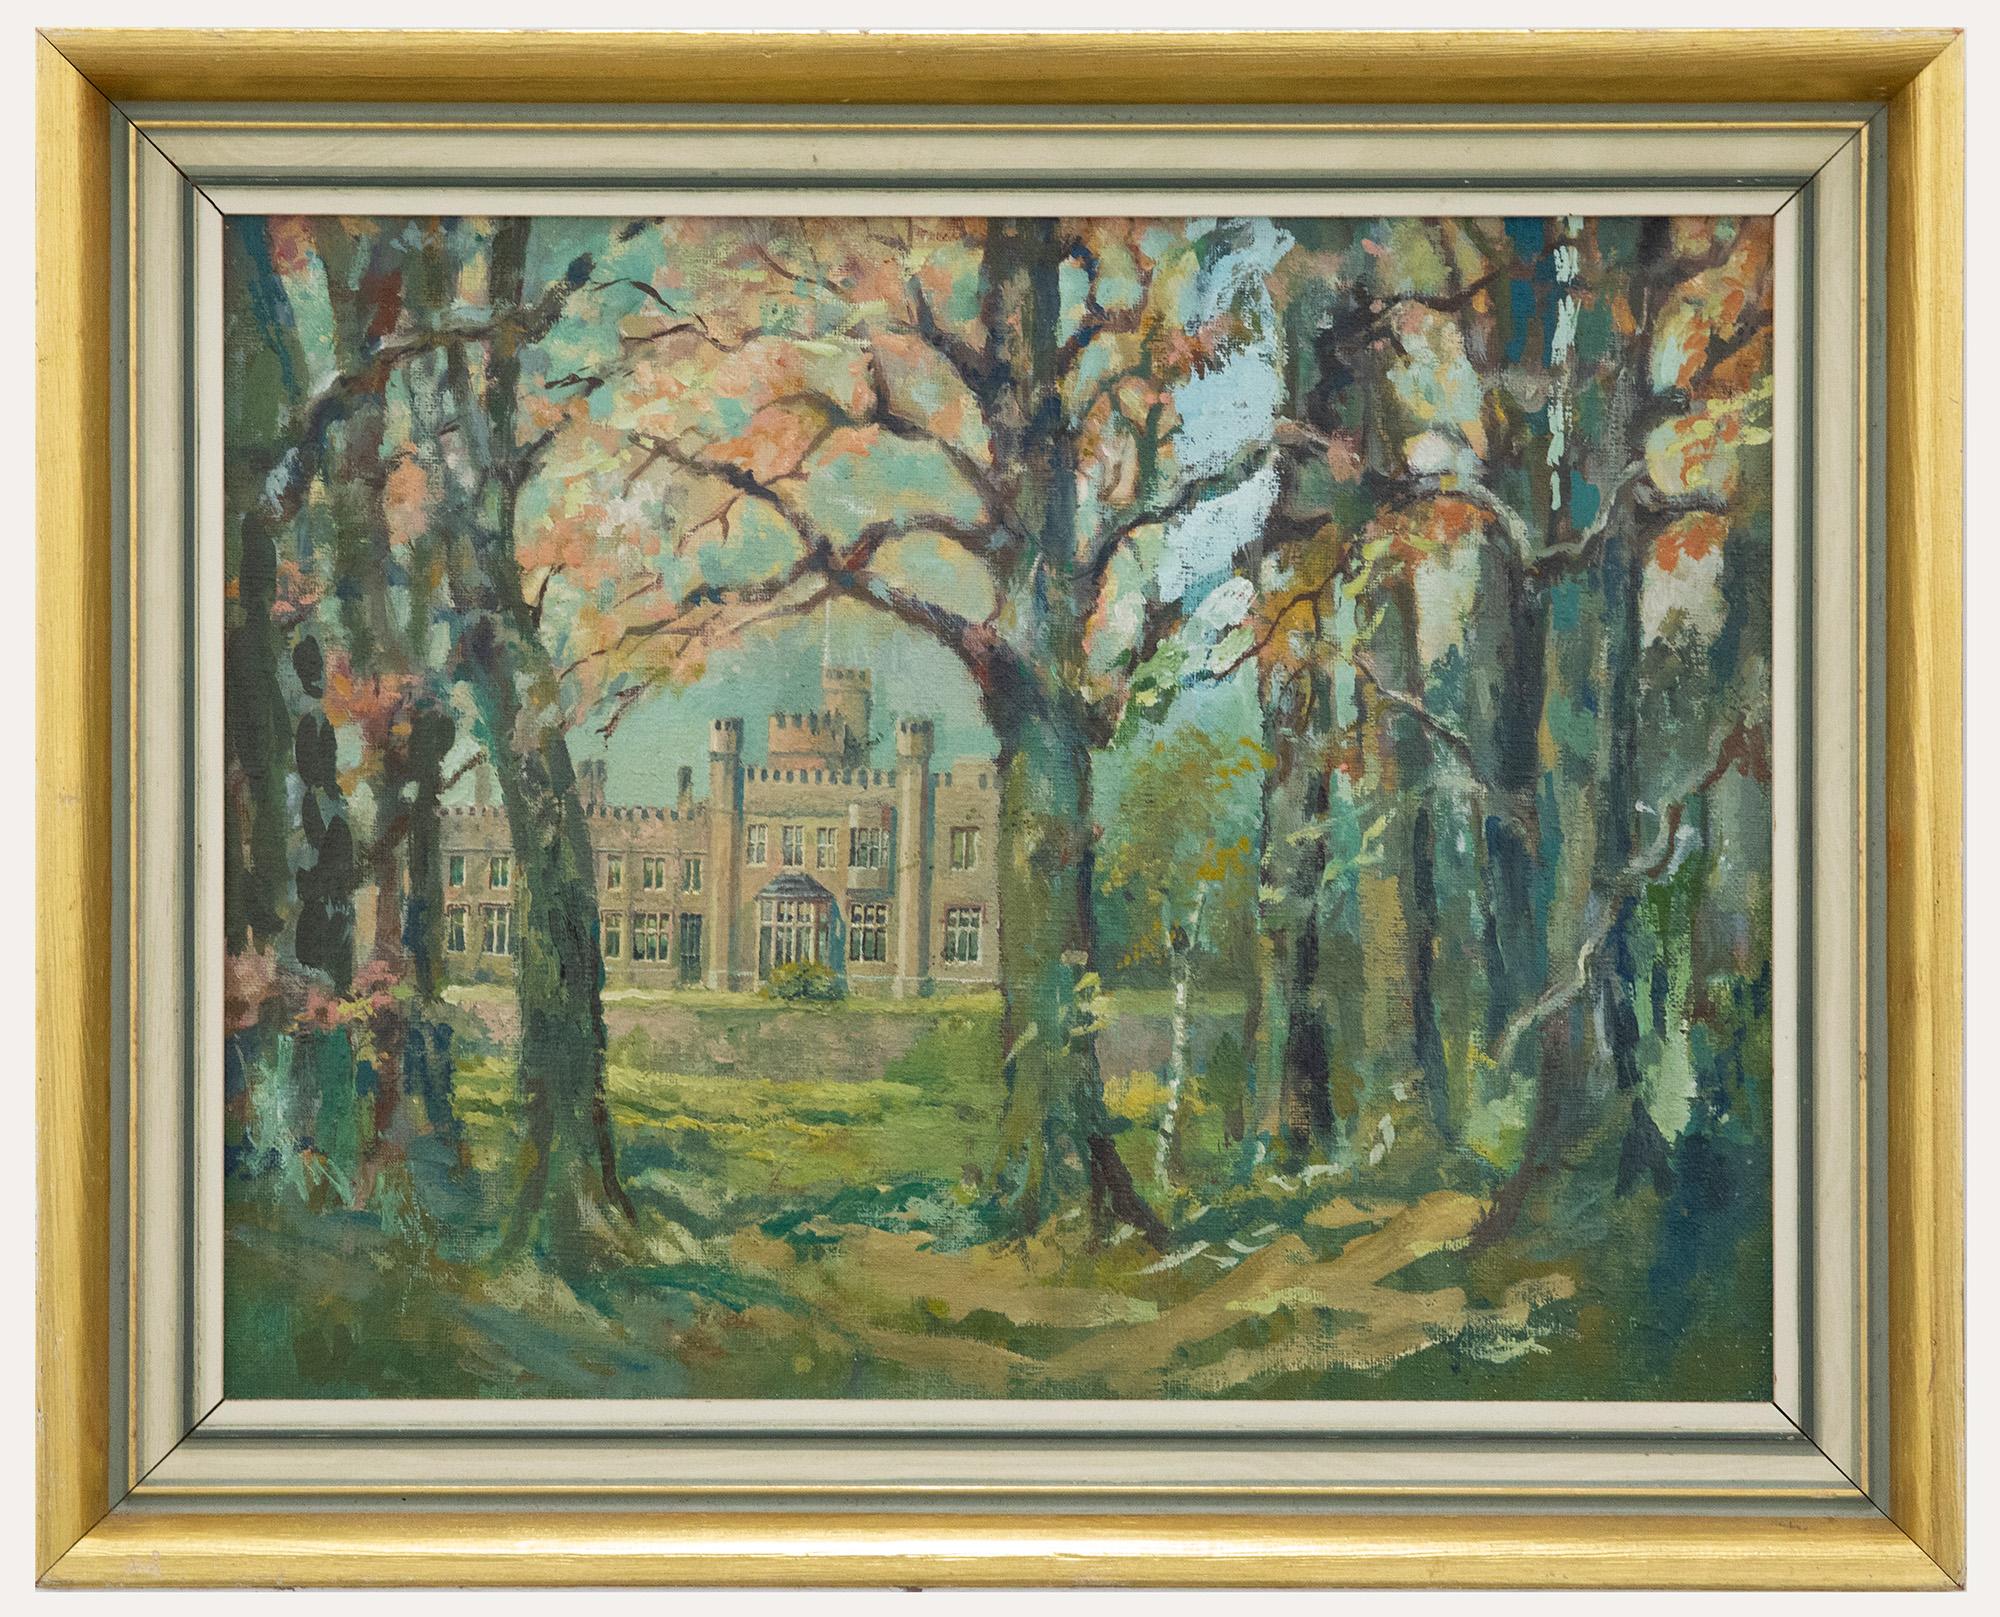 Unknown Landscape Painting - 20th Century Oil - Scottish Castle from the Woods